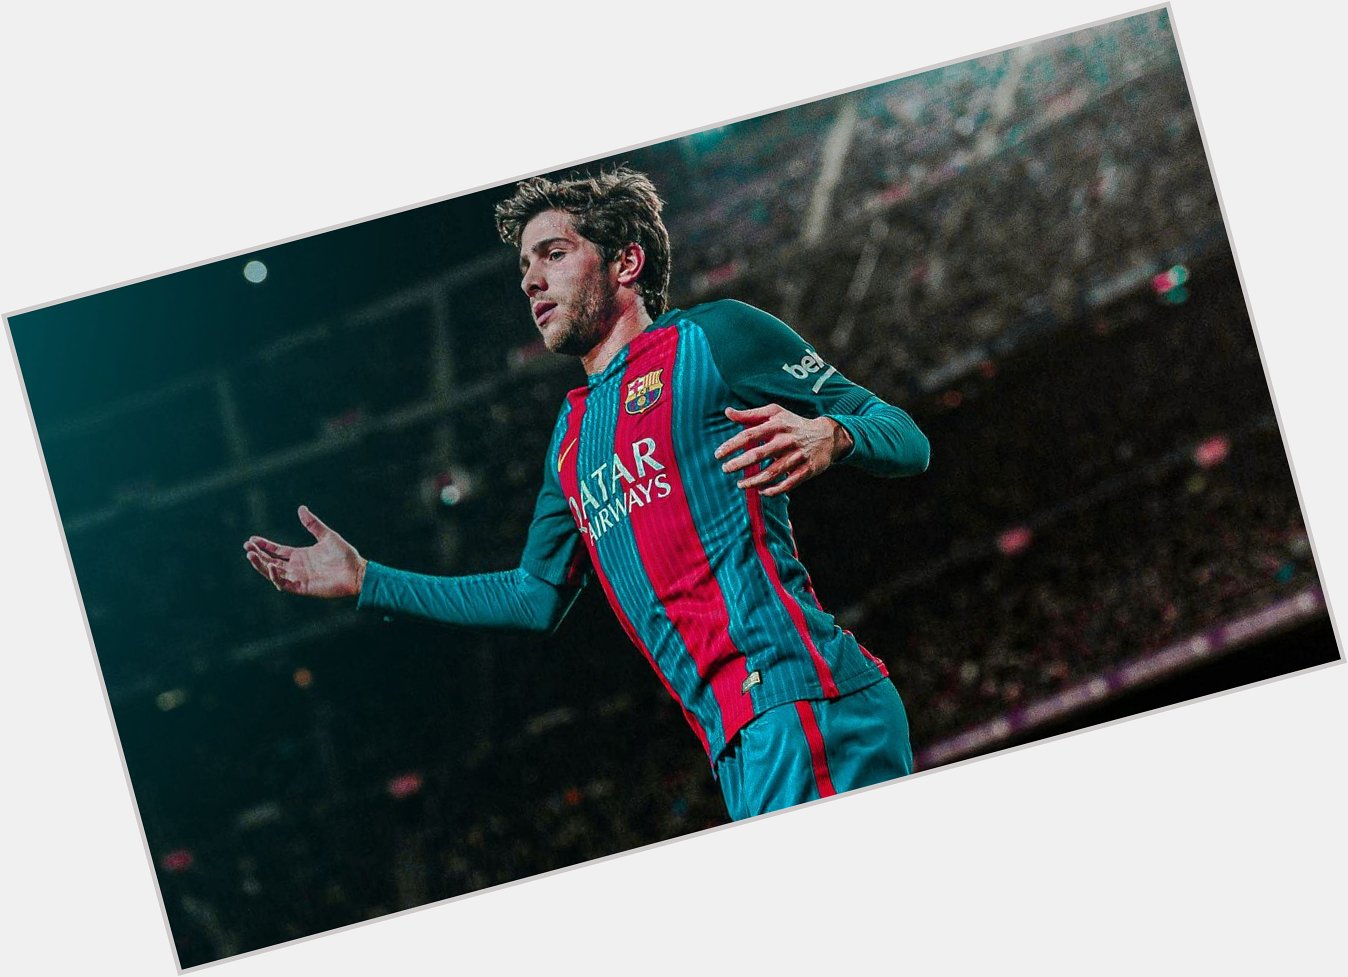 Wishing Sergi Roberto a very happy 29th birthday, hoping to see you on the pitch soon again love <3 